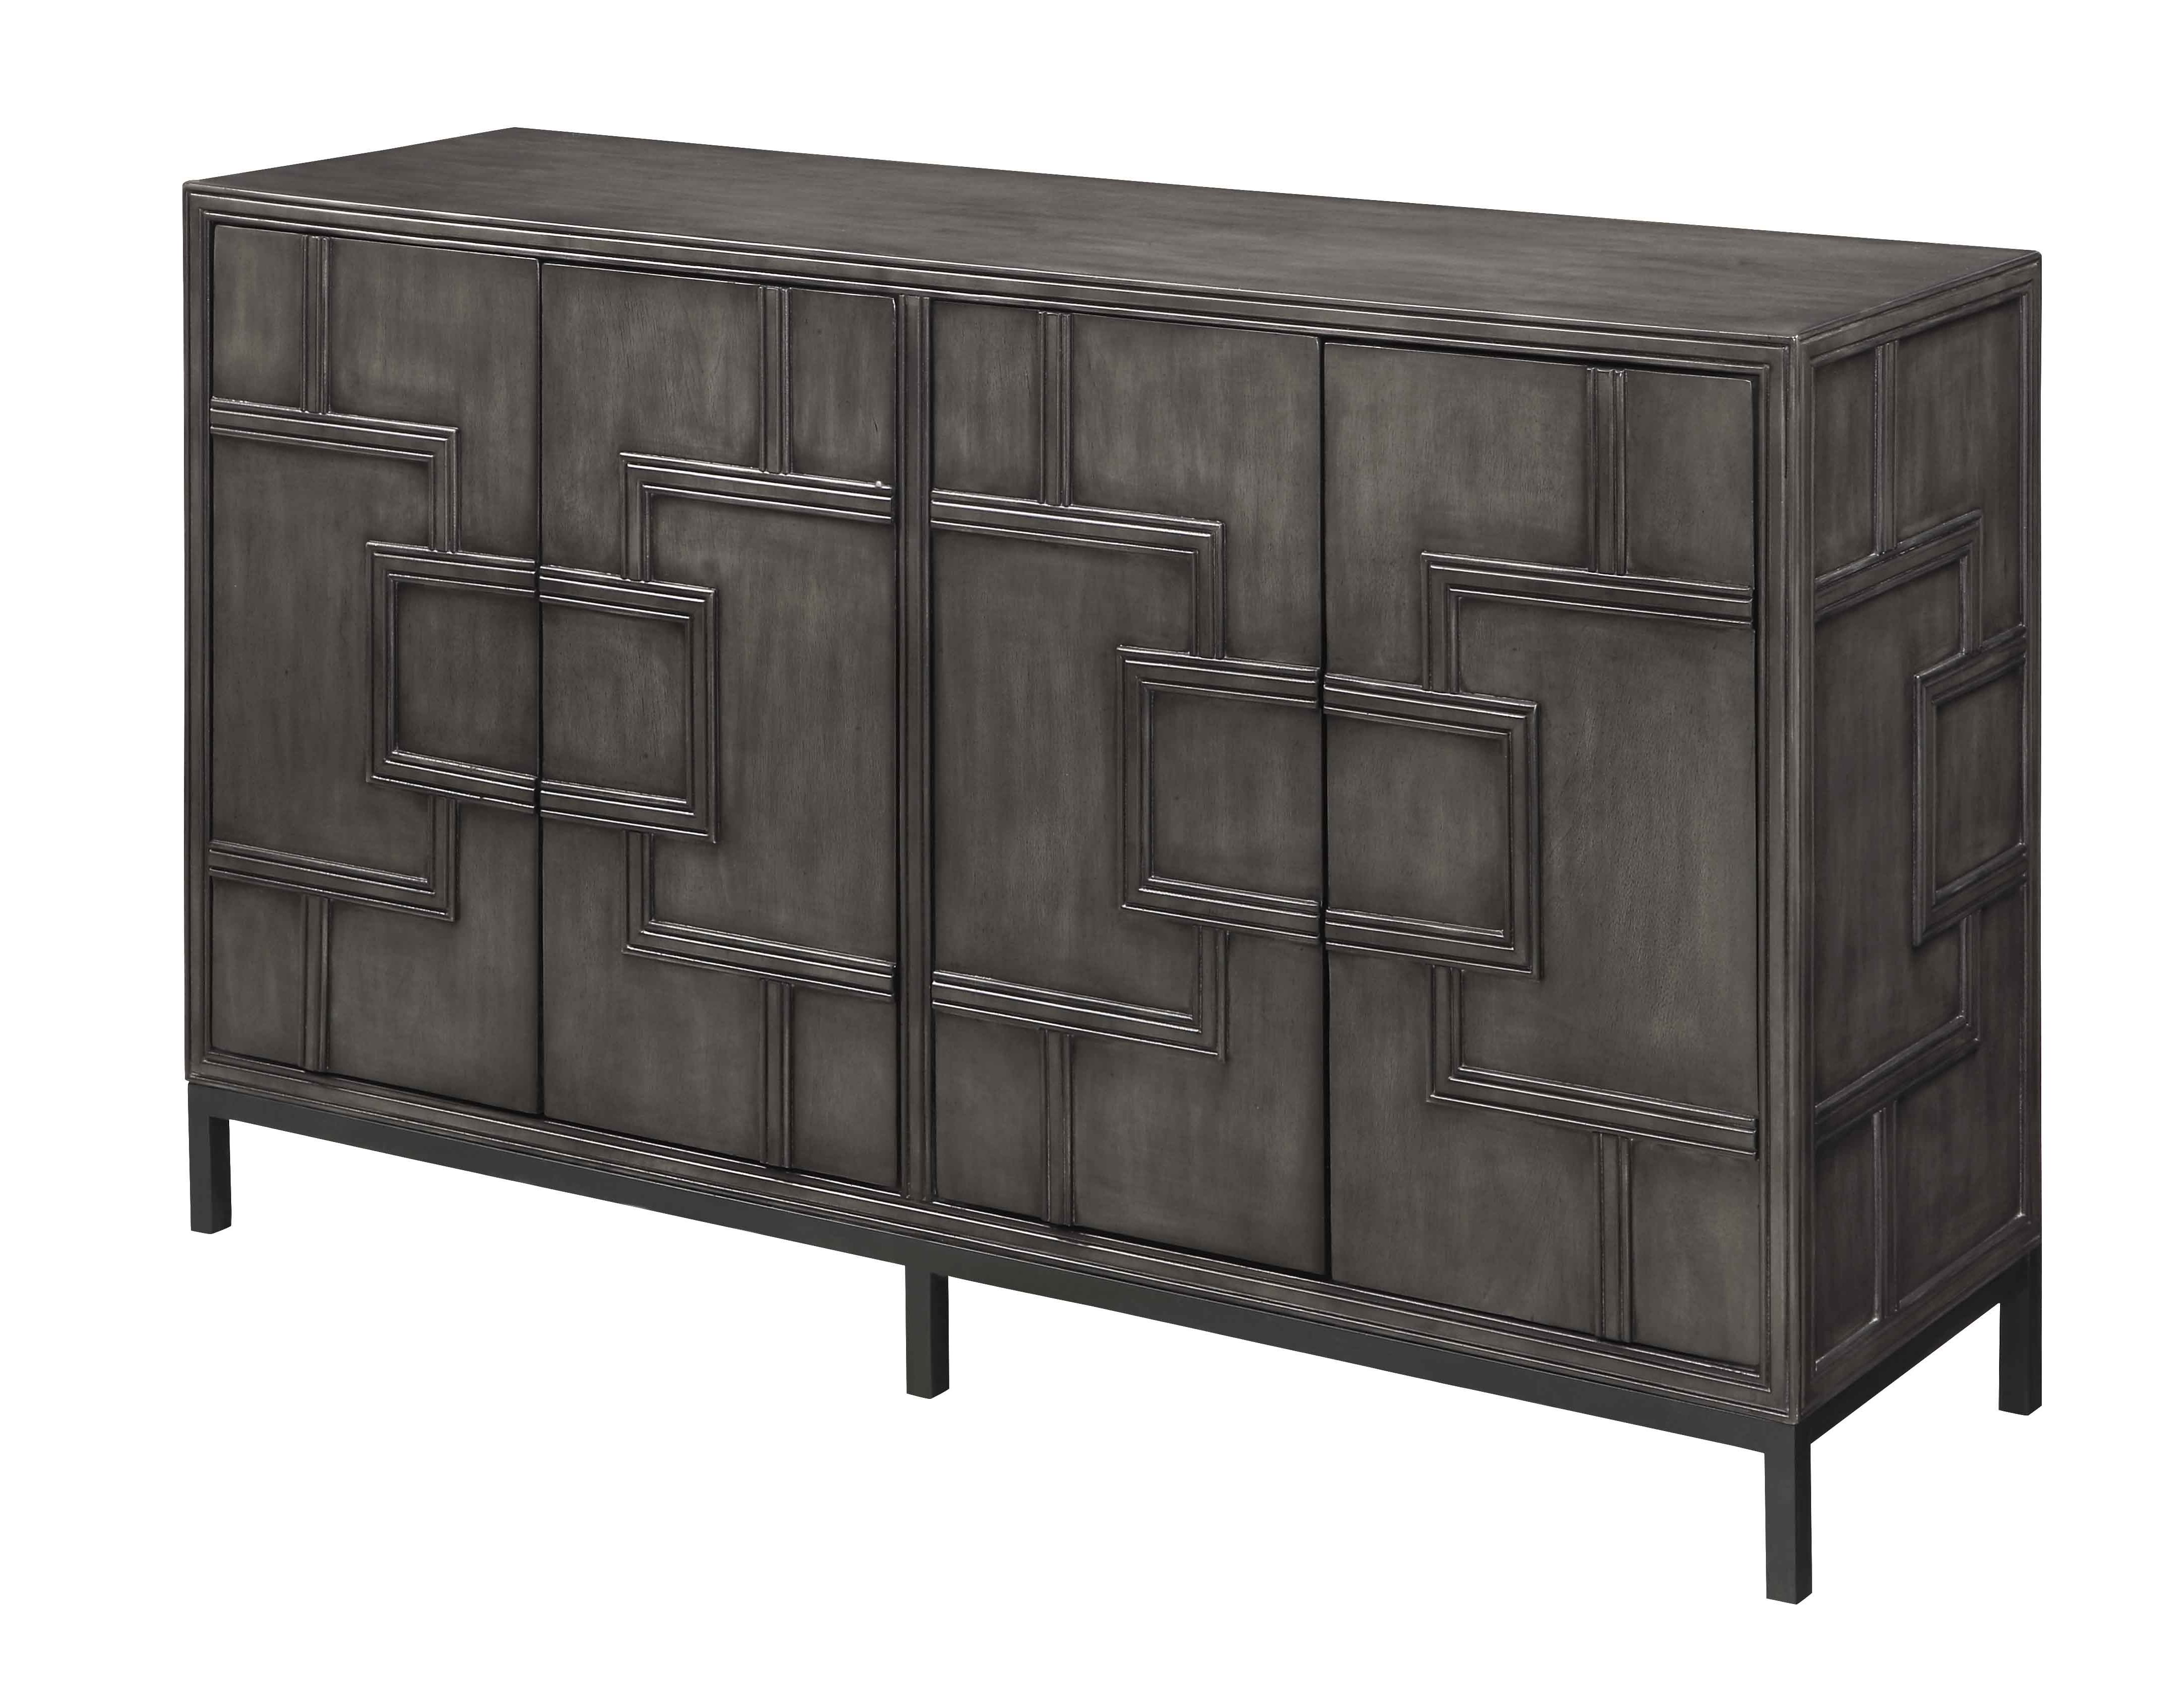 Coast To Coast Amberley Four Door Credenza Pertaining To Geometric Shapes Credenzas (View 11 of 20)